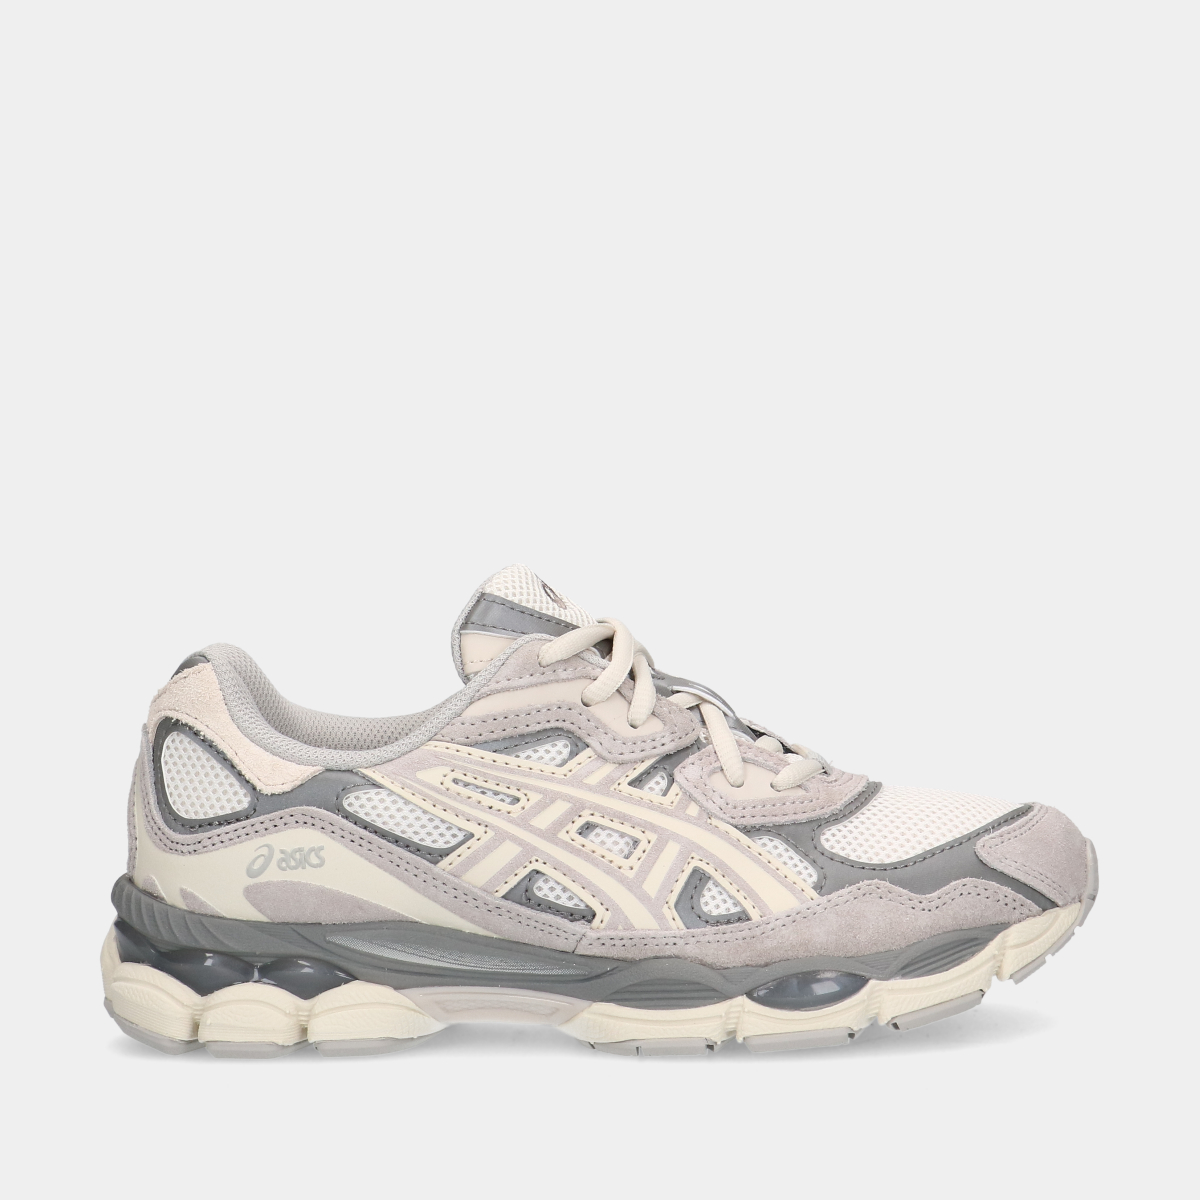 Asics GEL-NYC Cream Oyster Grey sneakers